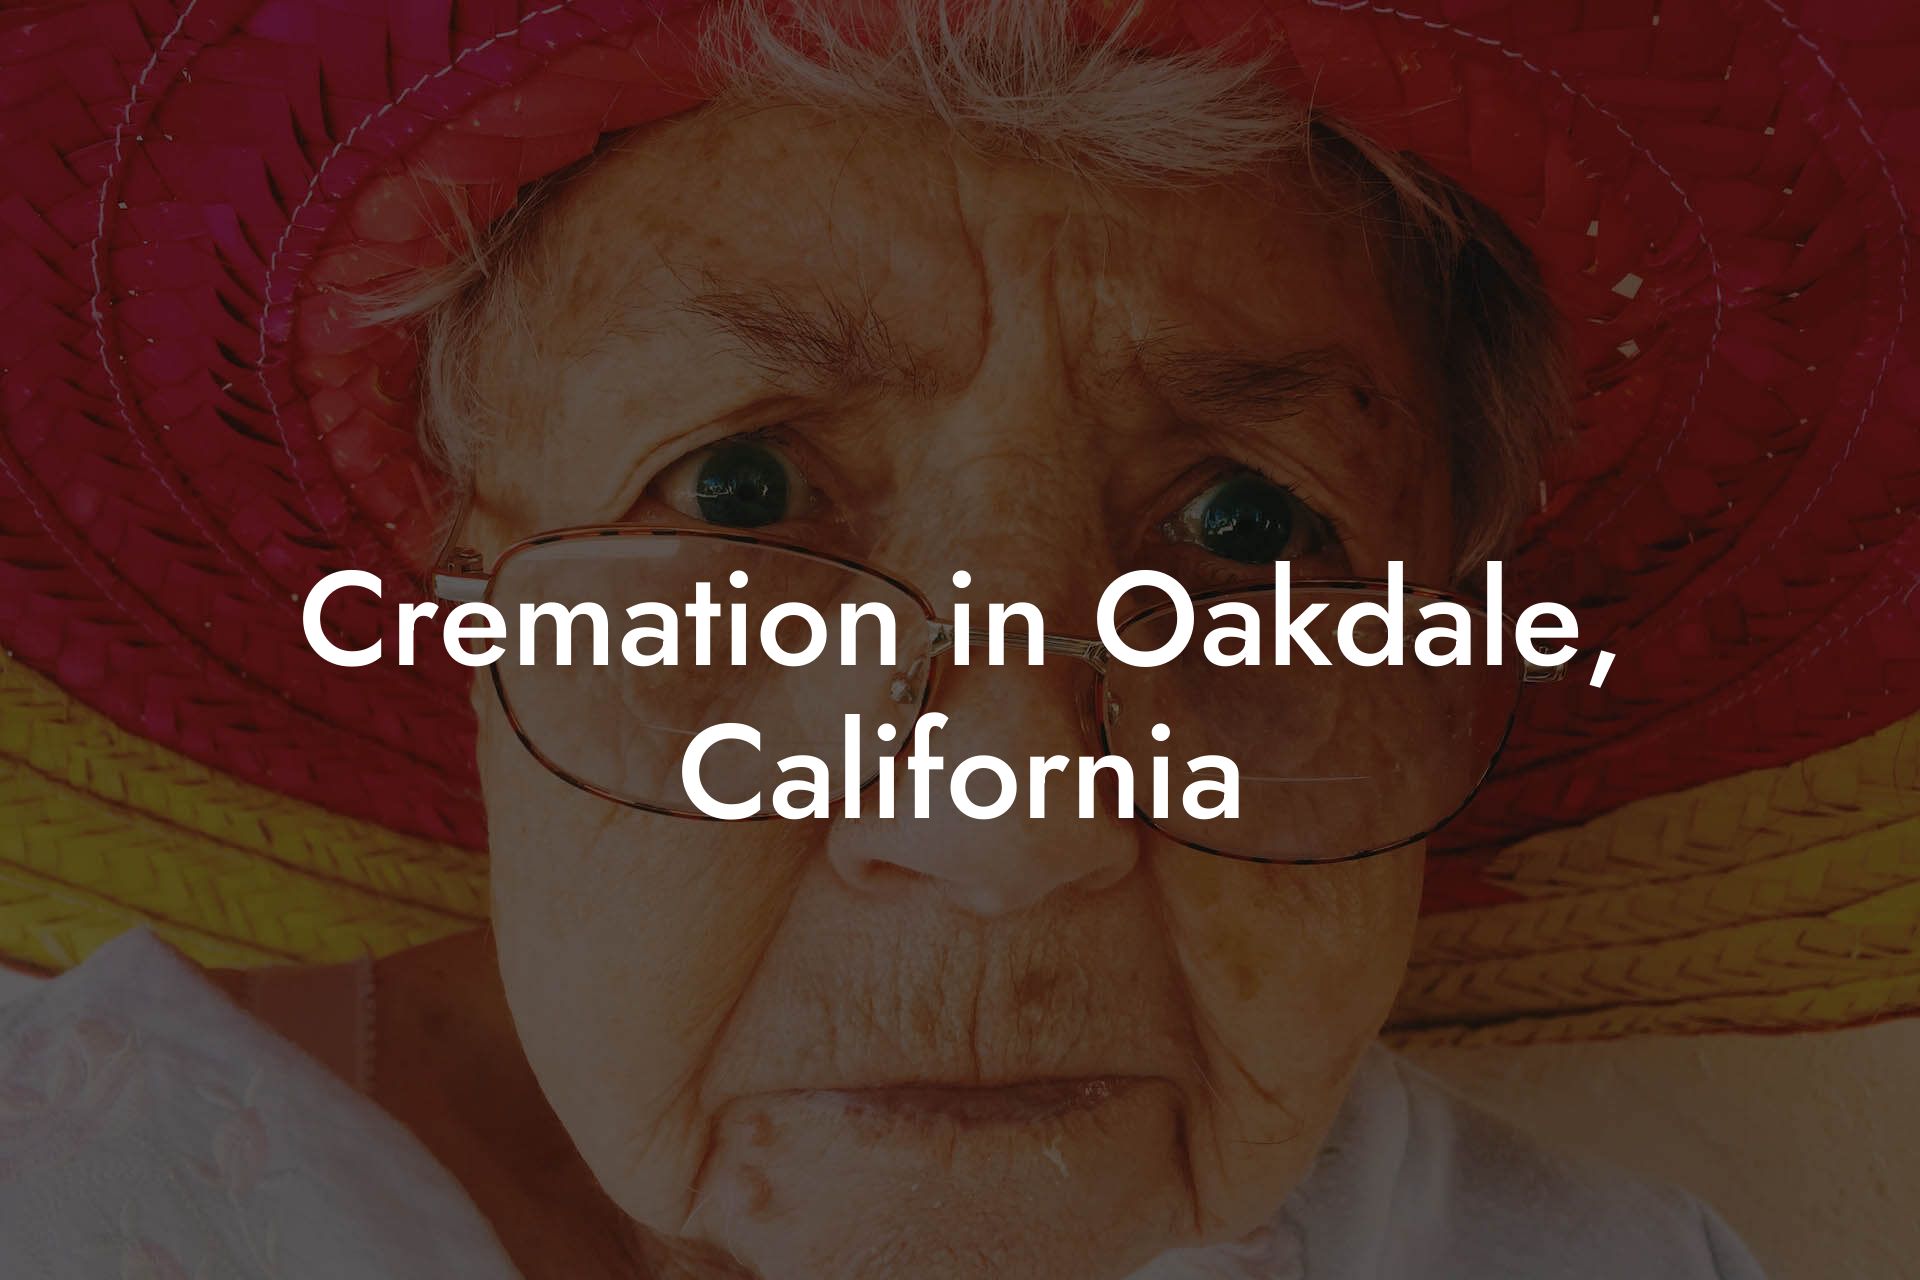 Cremation in Oakdale, California